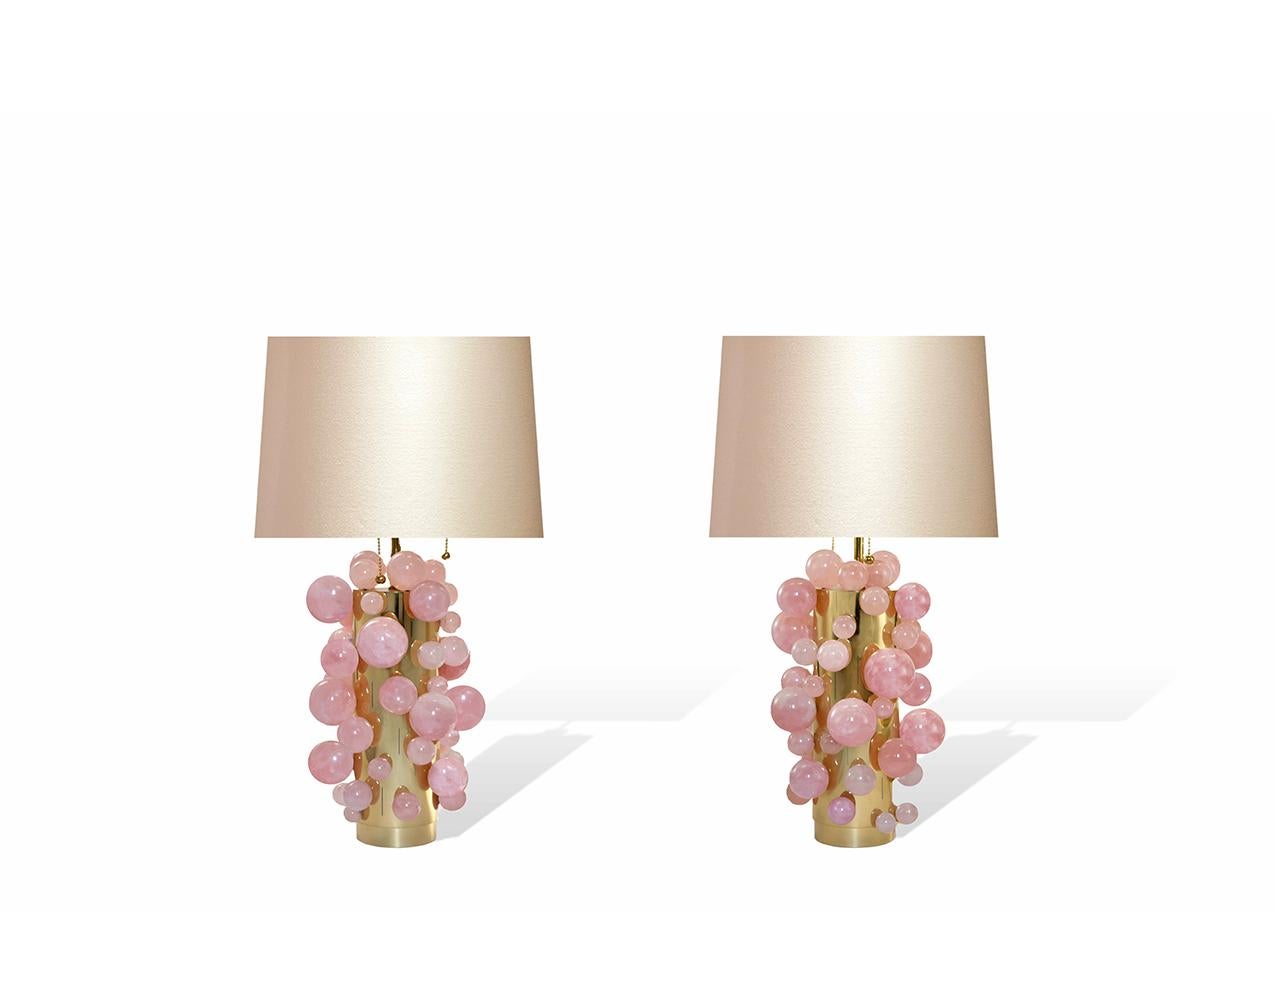 Pair of pink rock crystal bubble lamps with polished brass finishes, created by Phoenix Gallery, NYC. Measures: To the rock crystal part 13in / H. Overall height 25 inch High,Lampshade is not included.
Recommend shade size,13”top x 14”bottom x